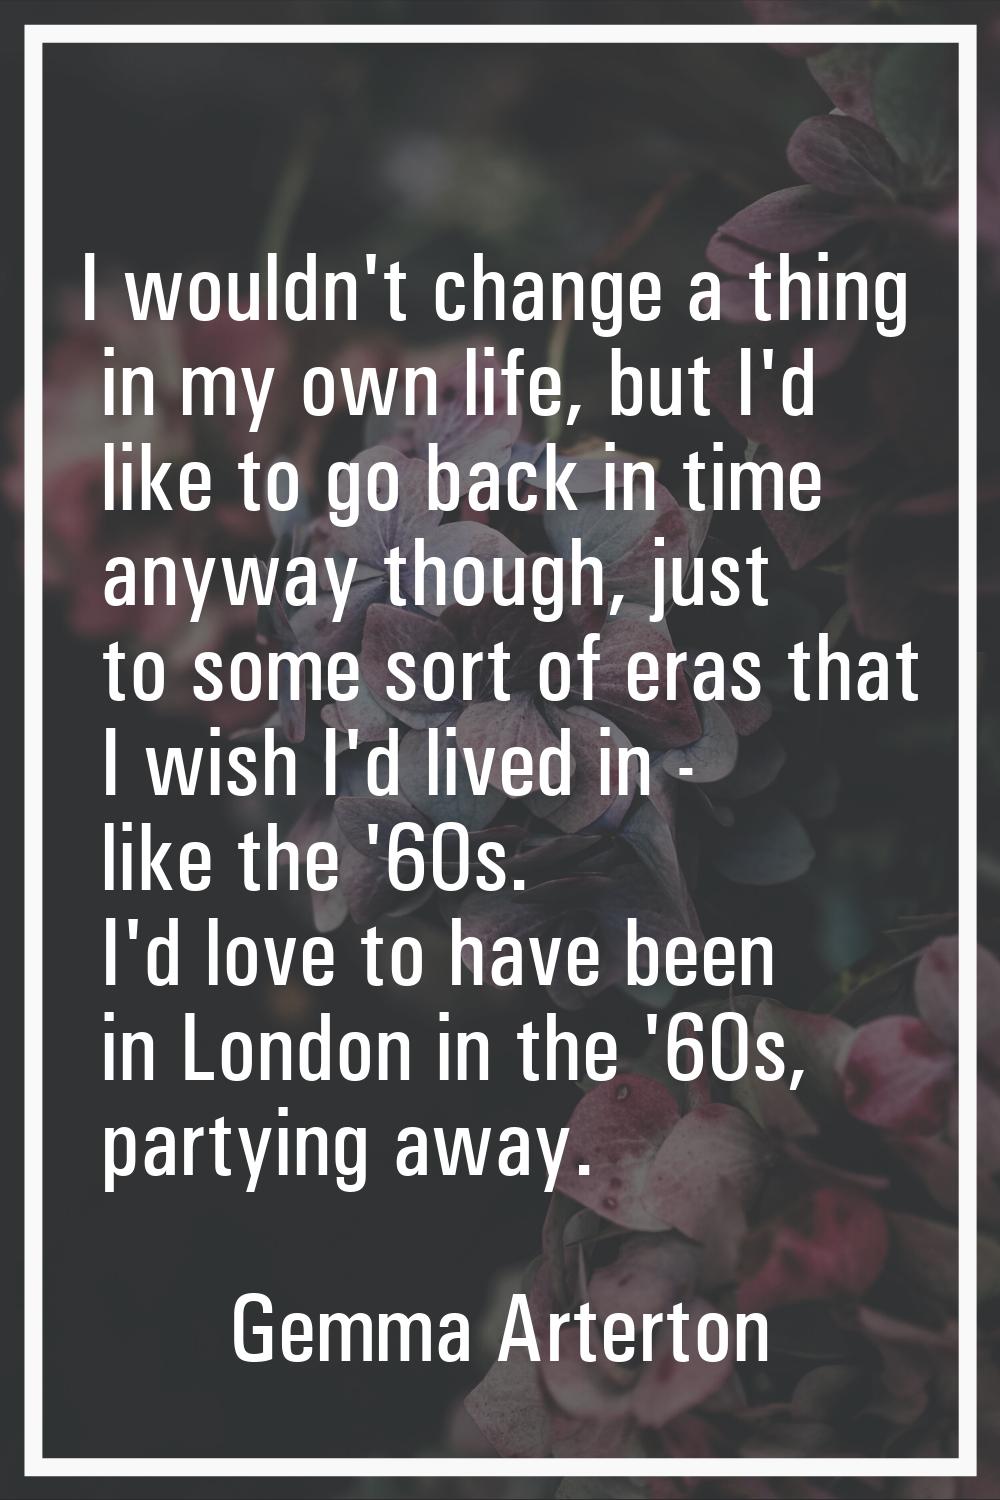 I wouldn't change a thing in my own life, but I'd like to go back in time anyway though, just to so